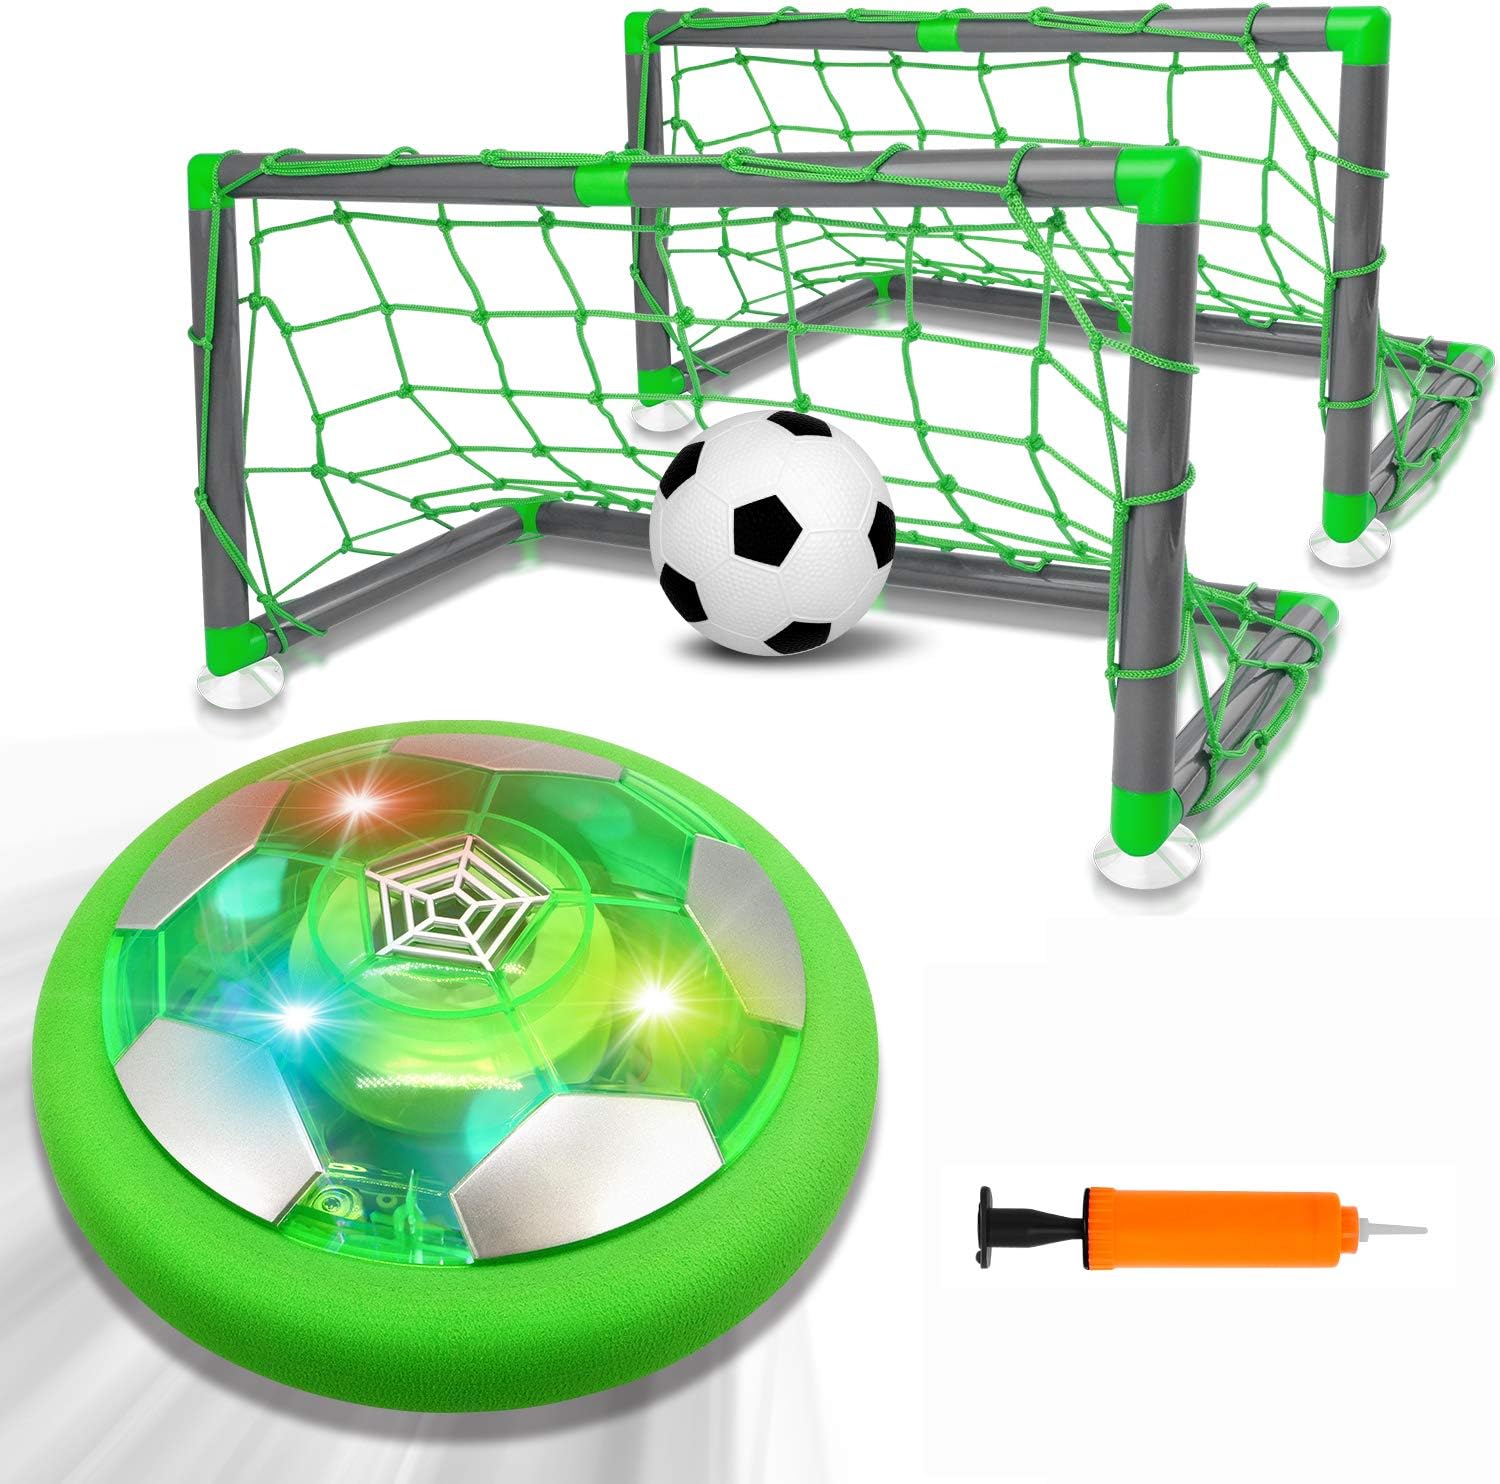 AOKESI Kids Toys Hover Soccer Ball Set with 2 Goal & 1 Kids Soccer Ball, LED Light Soccer Games, Hover Toys with Foam Bumper for Indoor Games, Toddler Boy Toys Gifts for 2-13 Year Old Boys Girls Toys